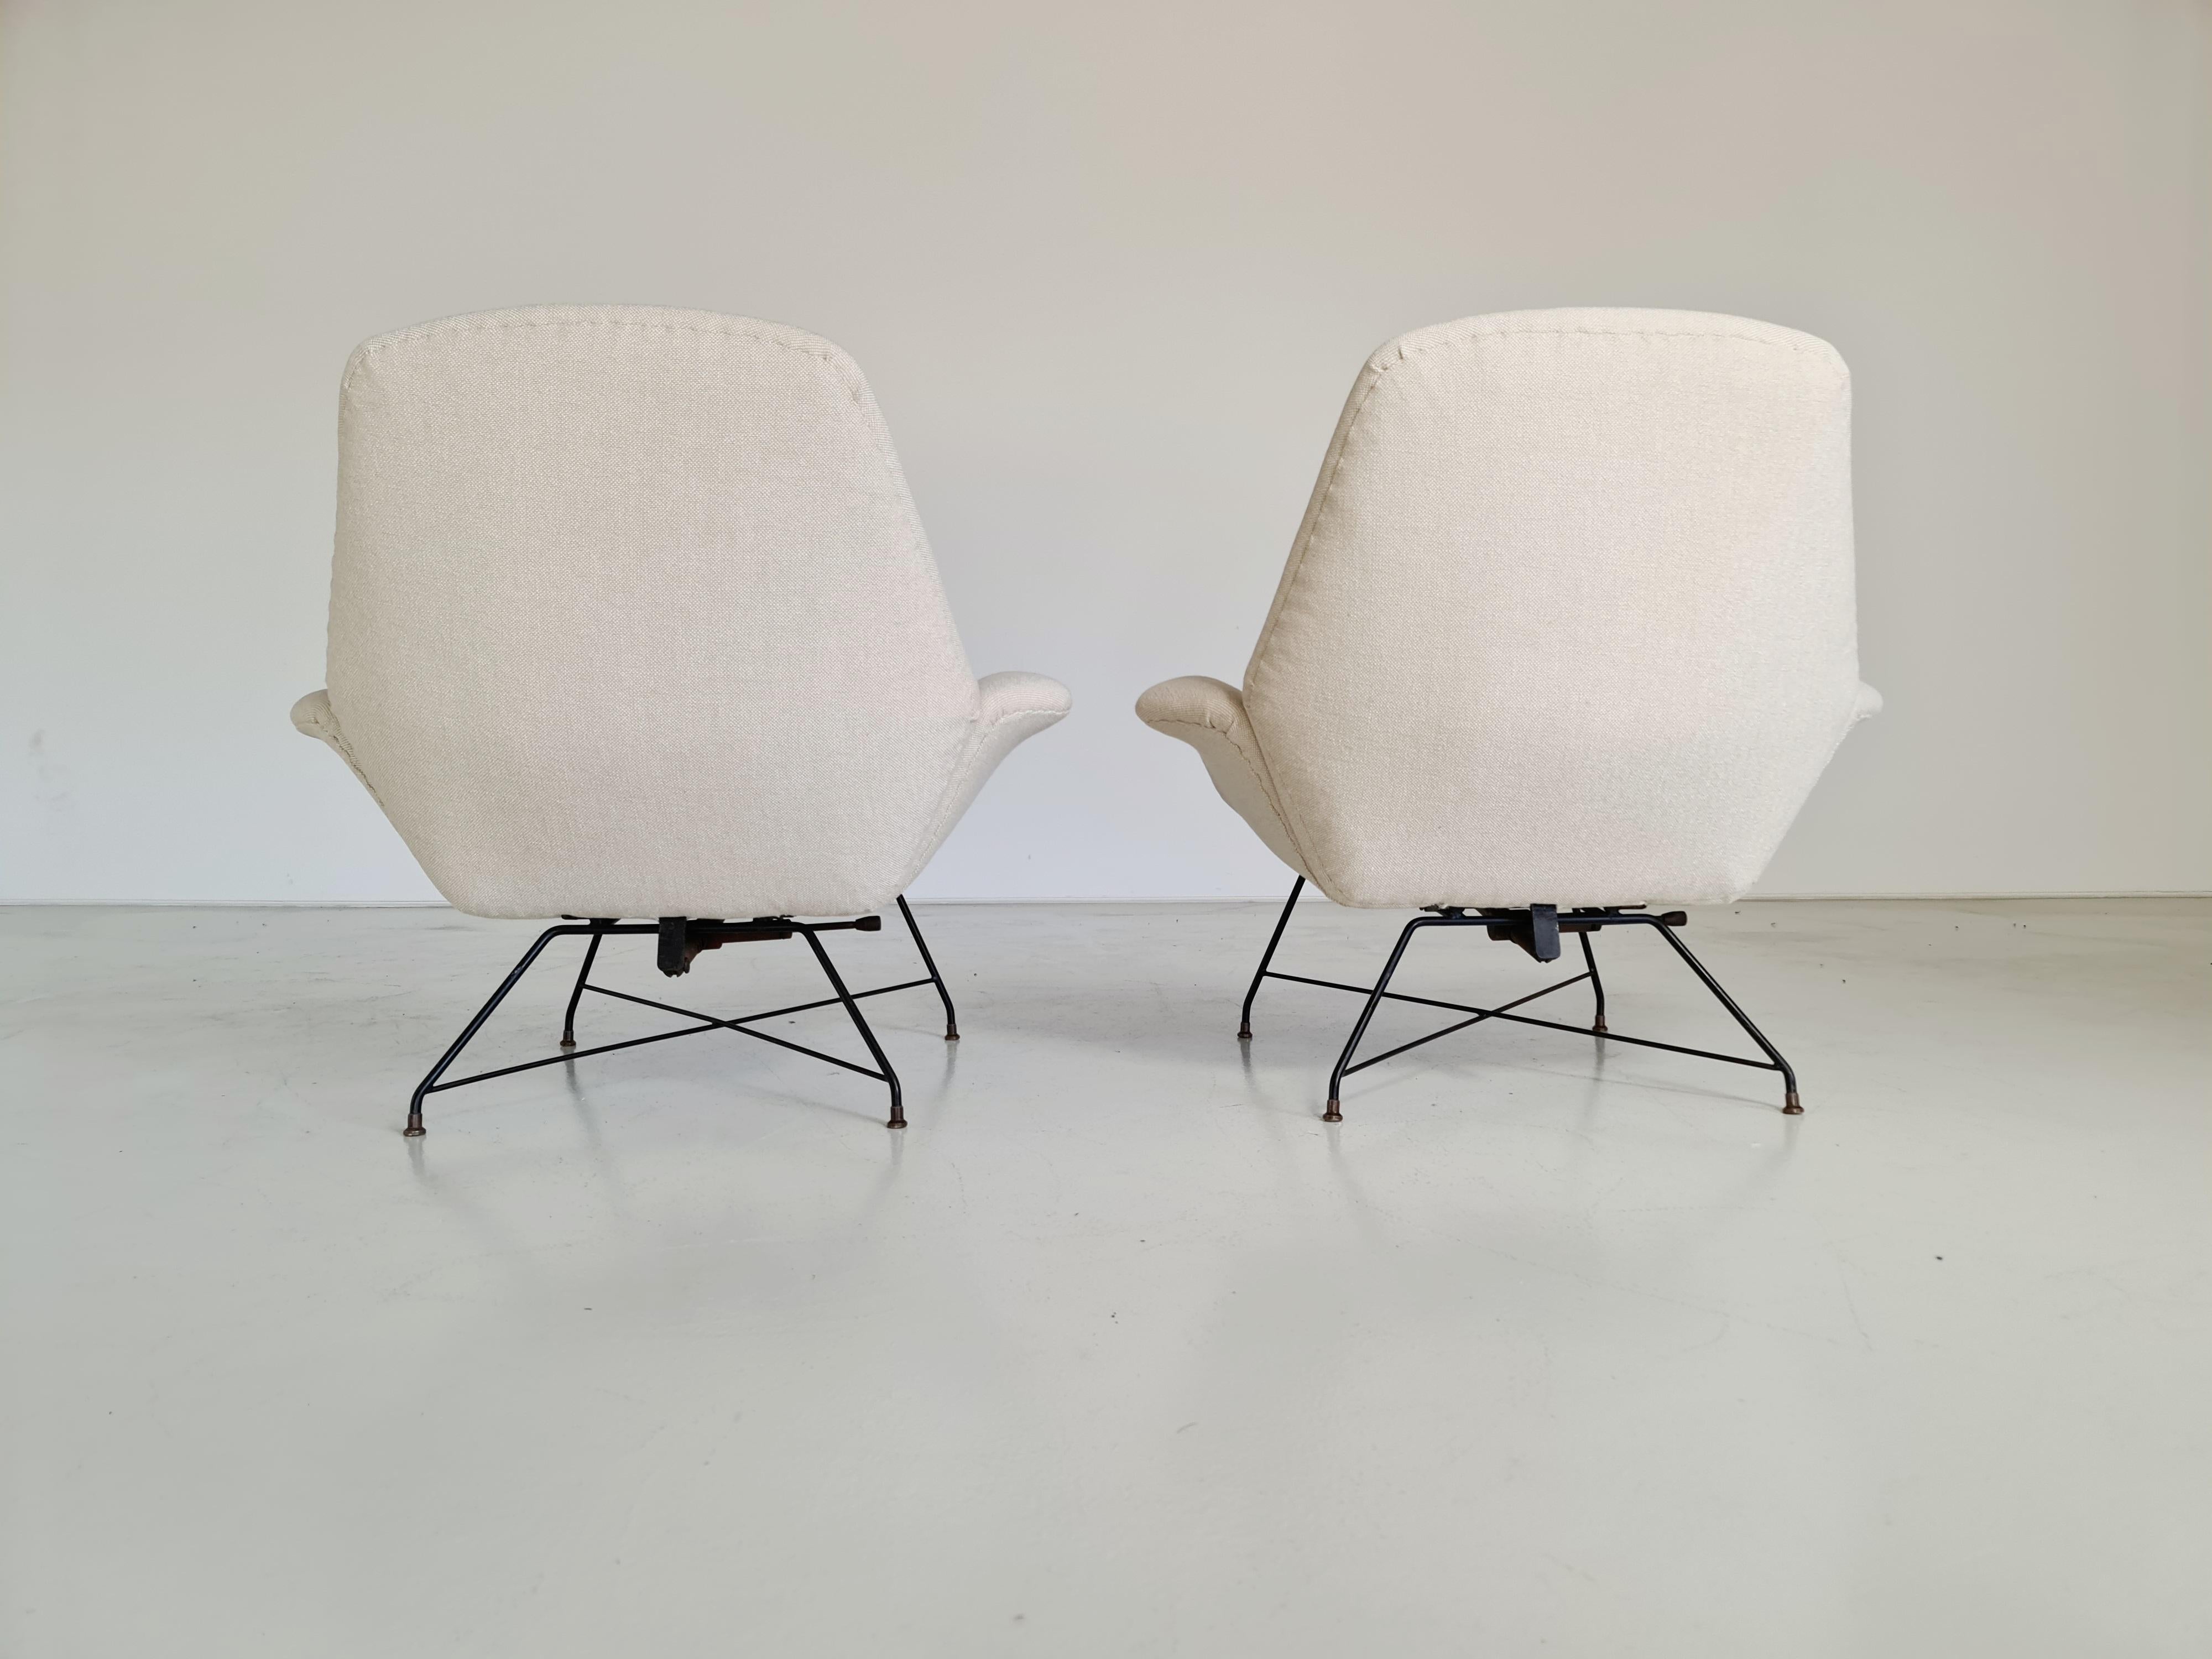 ‘Lotus’ Lounge Chairs in cream wool fabric by Augusto Bozzi for Saporiti, 1960s In Good Condition For Sale In amstelveen, NL